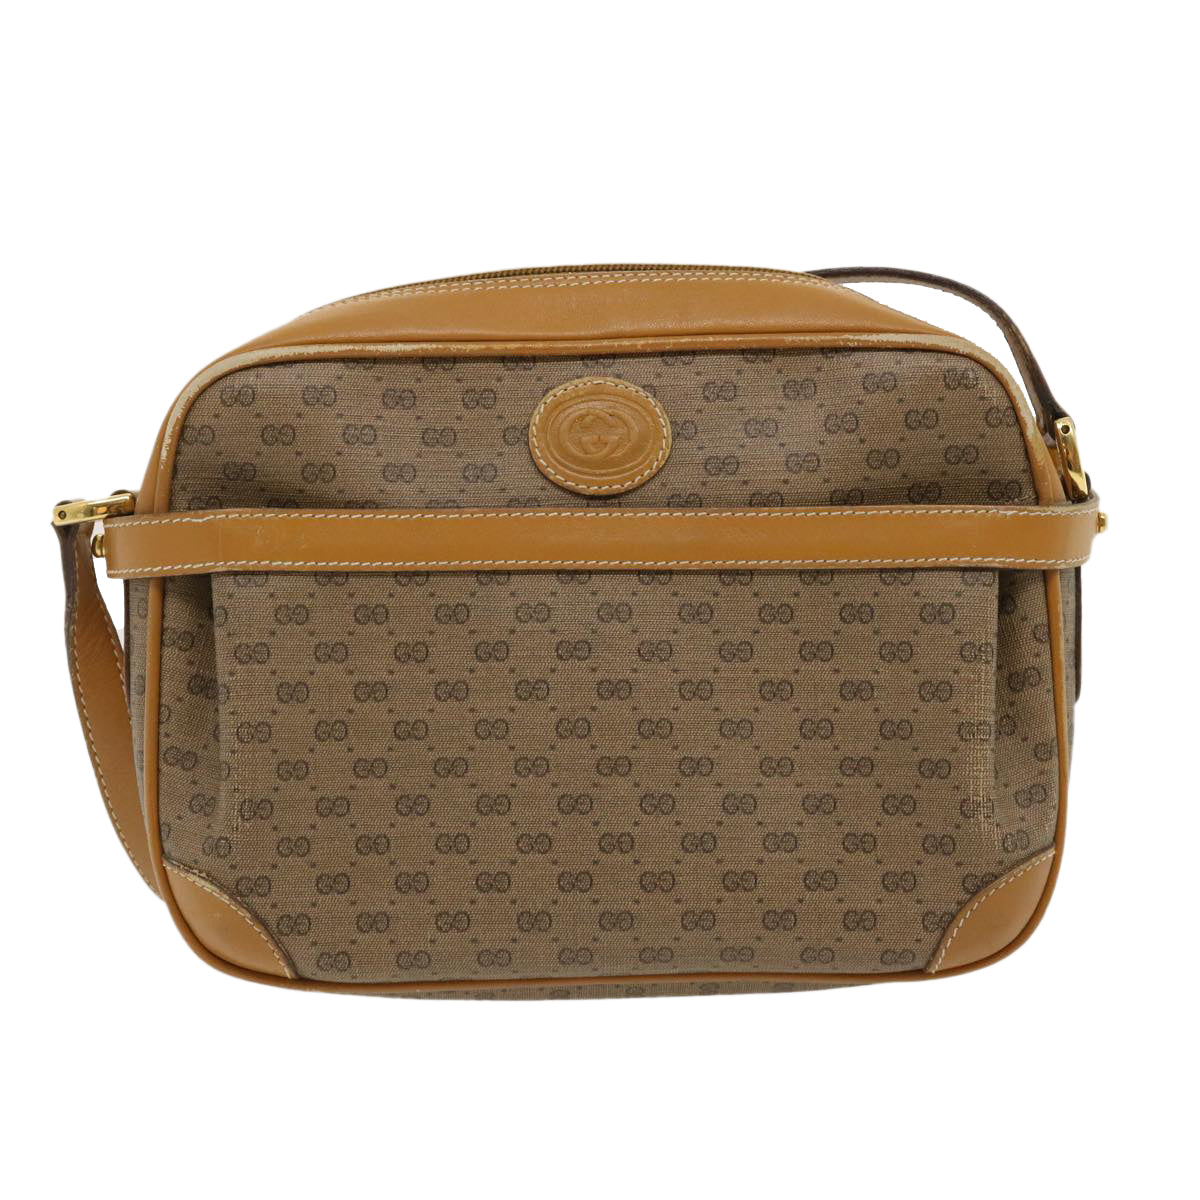 GUCCI Micro GG Canvas Shoulder Bag PVC Leather Beige Brown Auth th2698 - 0